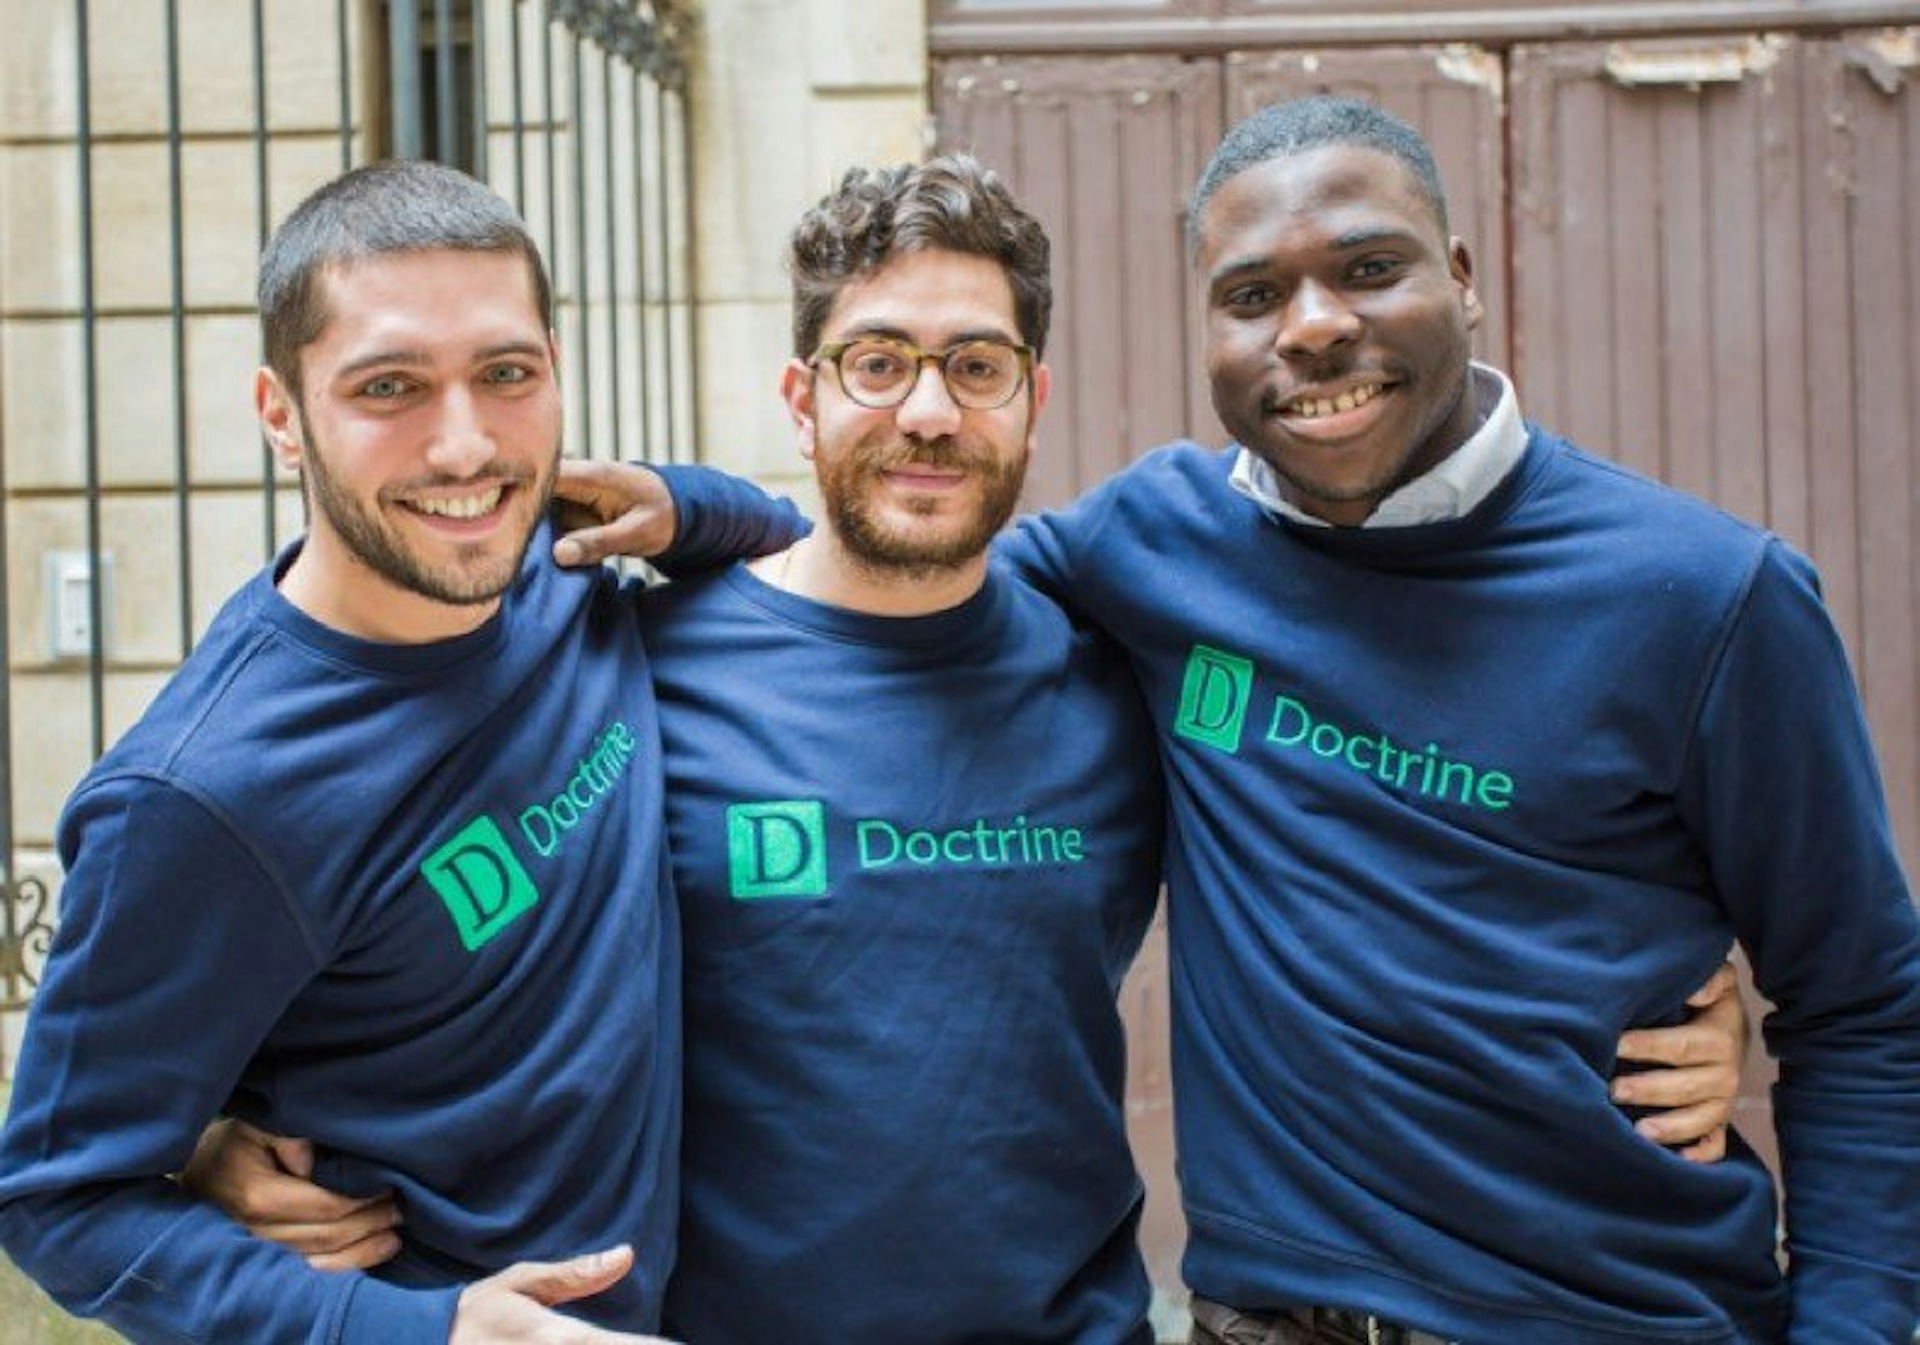 Startups like Doctrine, the new legal search engine that needed to develop its volume of prospects